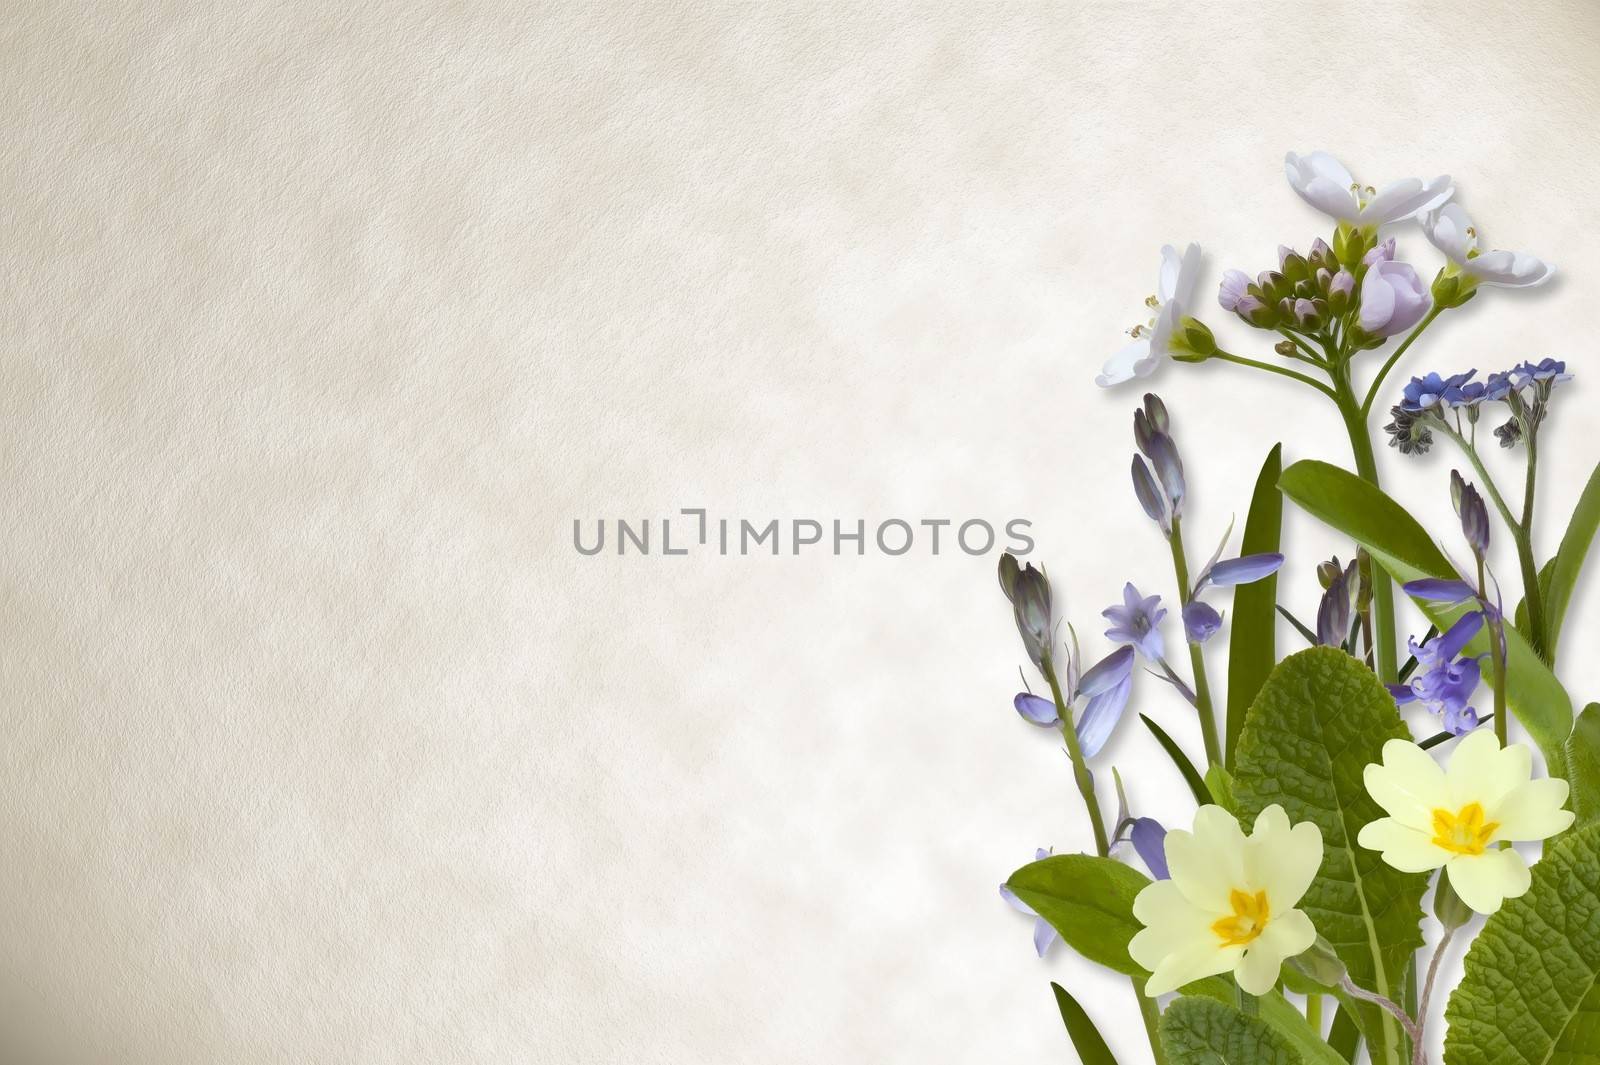 Spring flowers including bluebell and primrose on parchment paper background.